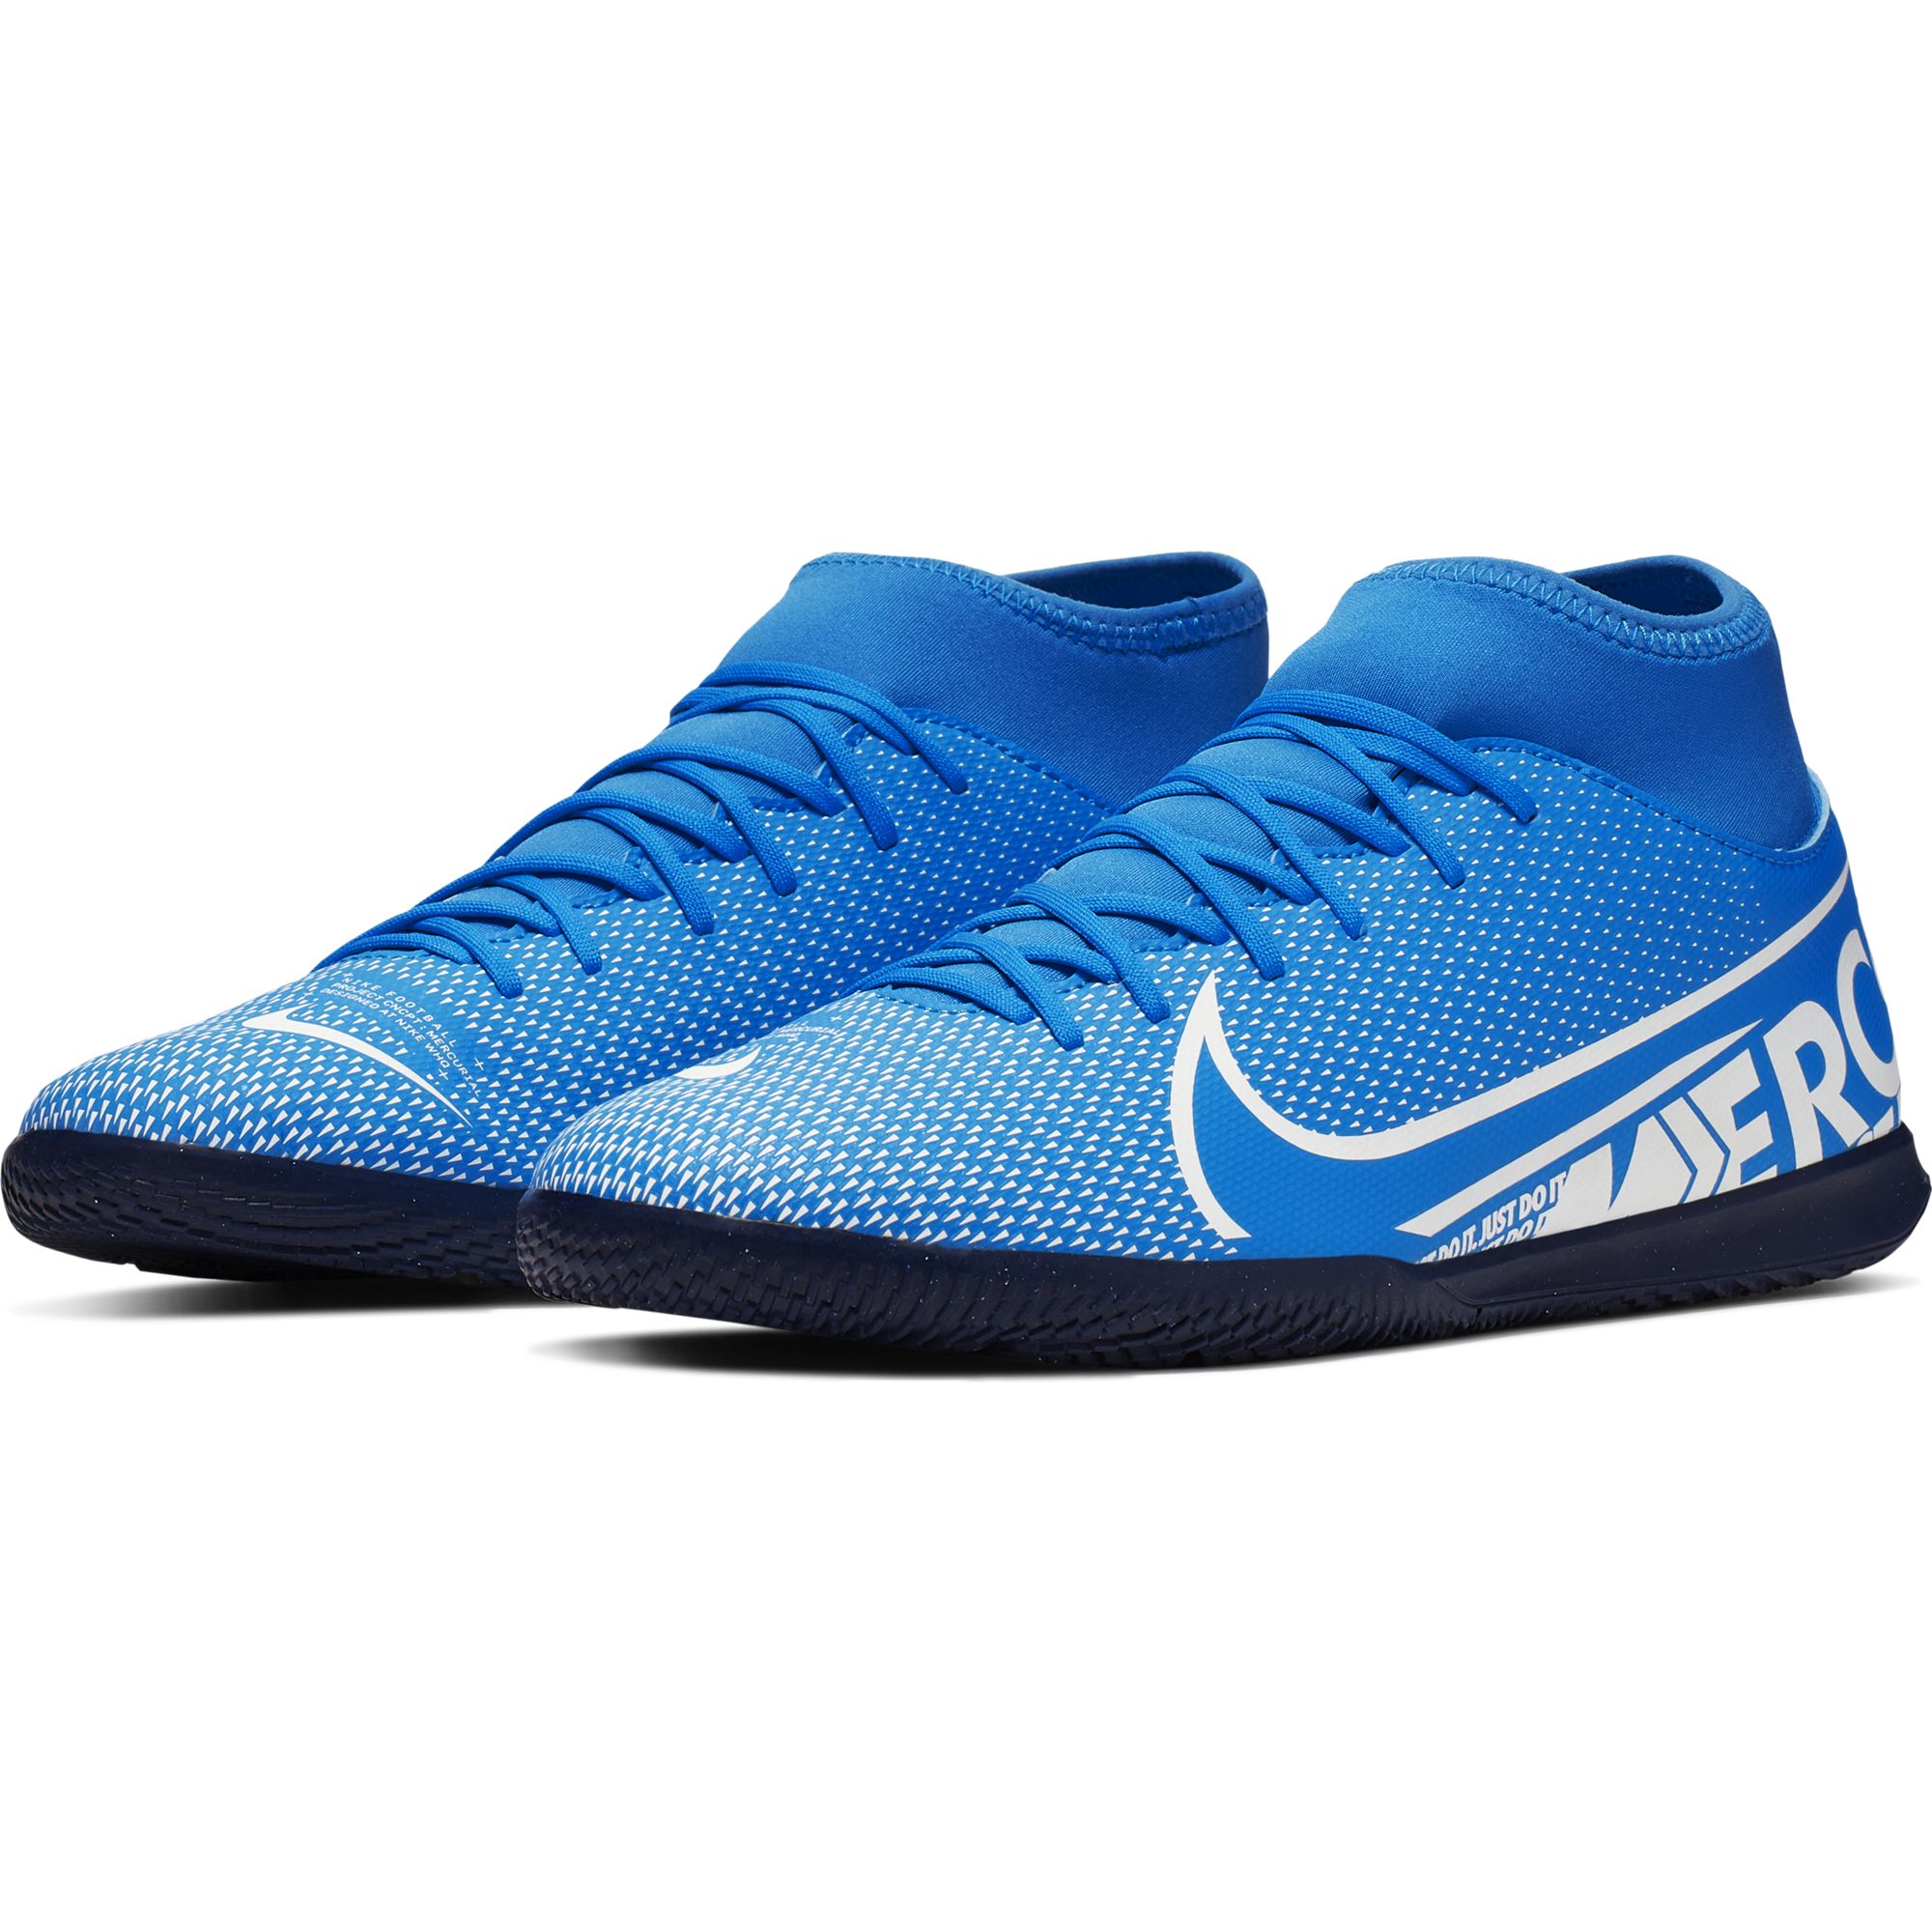 Nike Mercurial Superfly 7 Club IC Indoor/Court Soccer Shoe - Unisex ...
